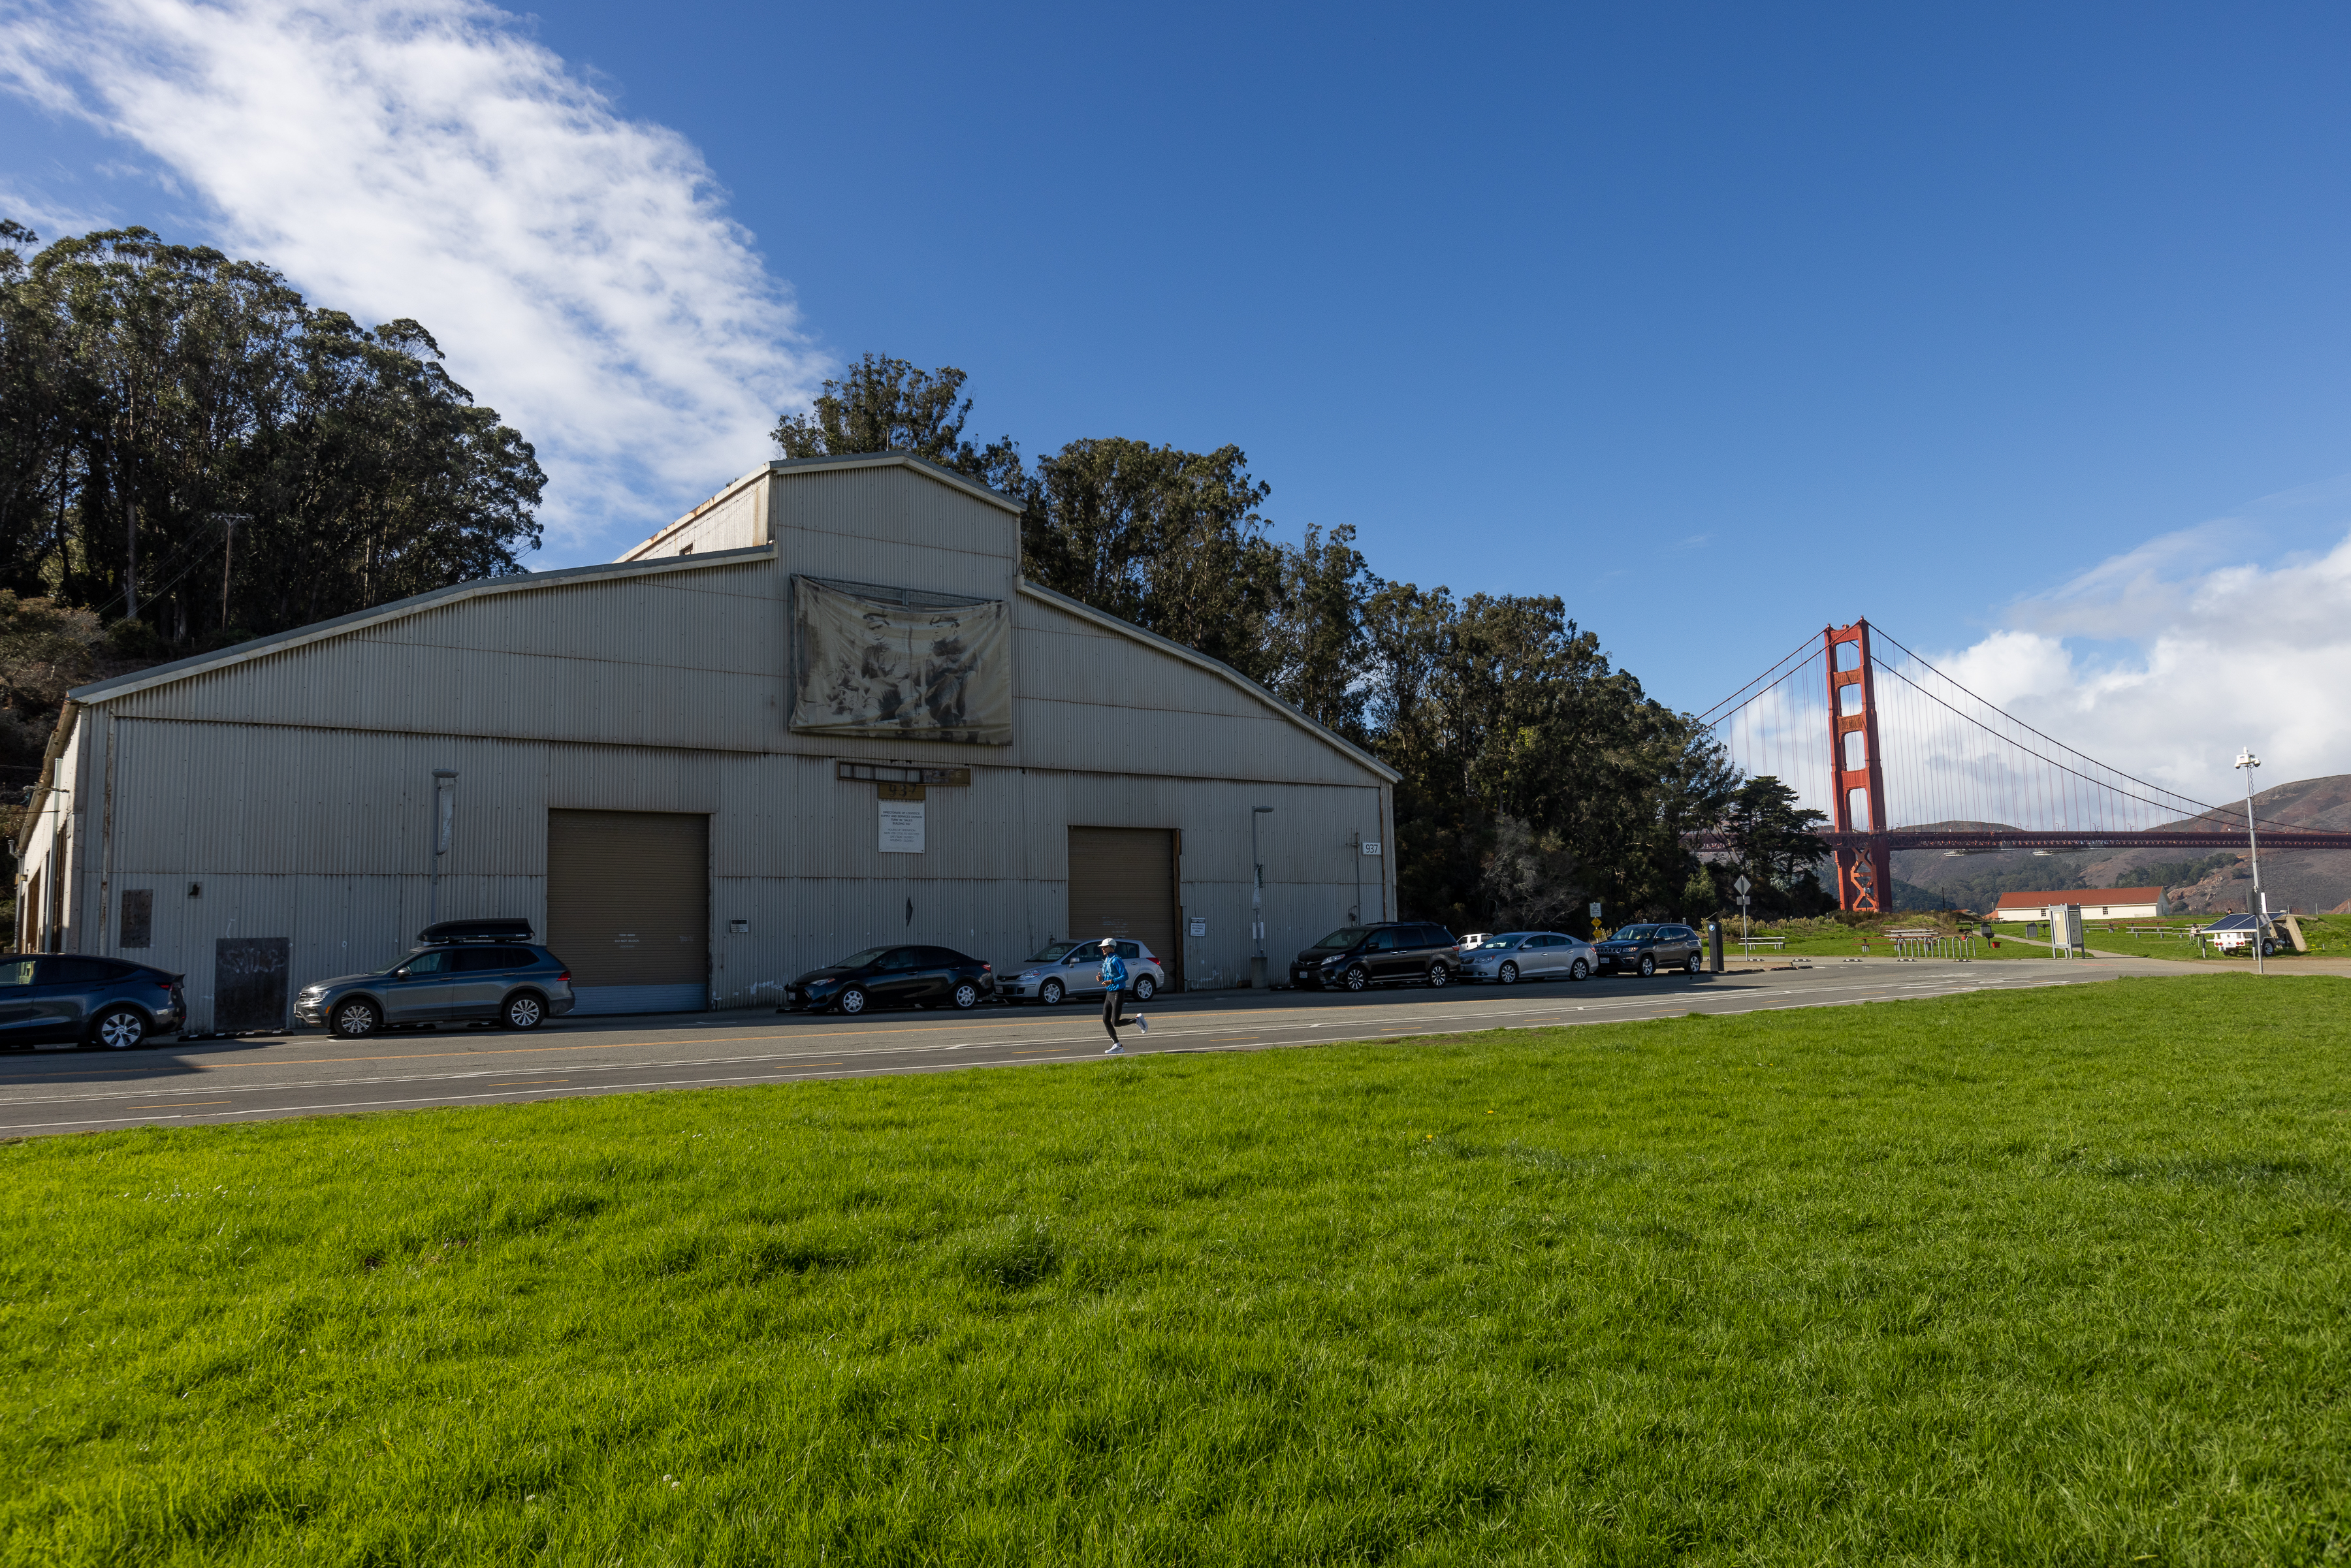 Airport hangars on Mason street with the golden gate bridge in the background.